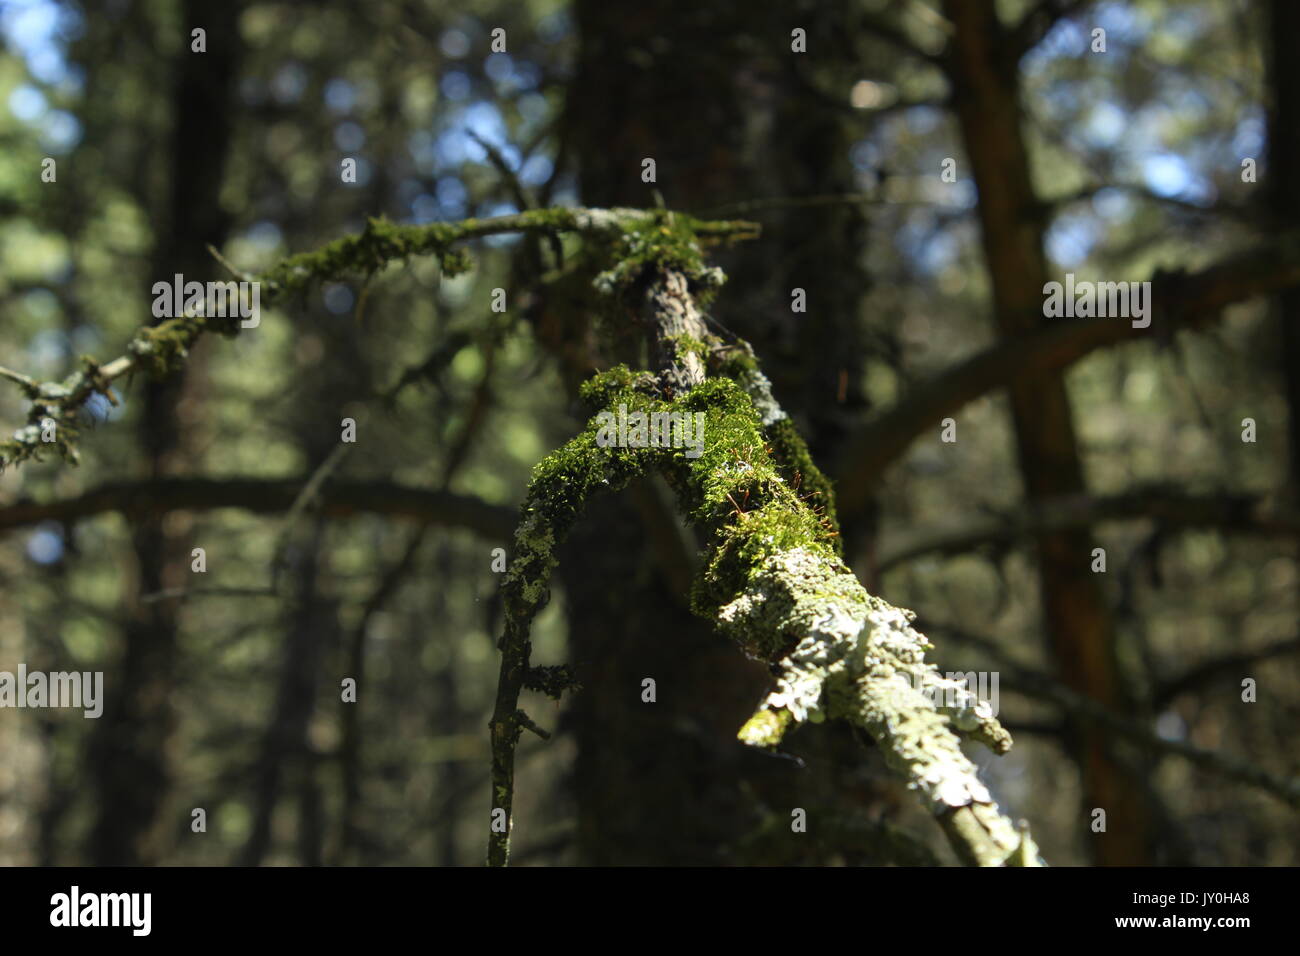 Moss growing on trees out in the woods. Stock Photo